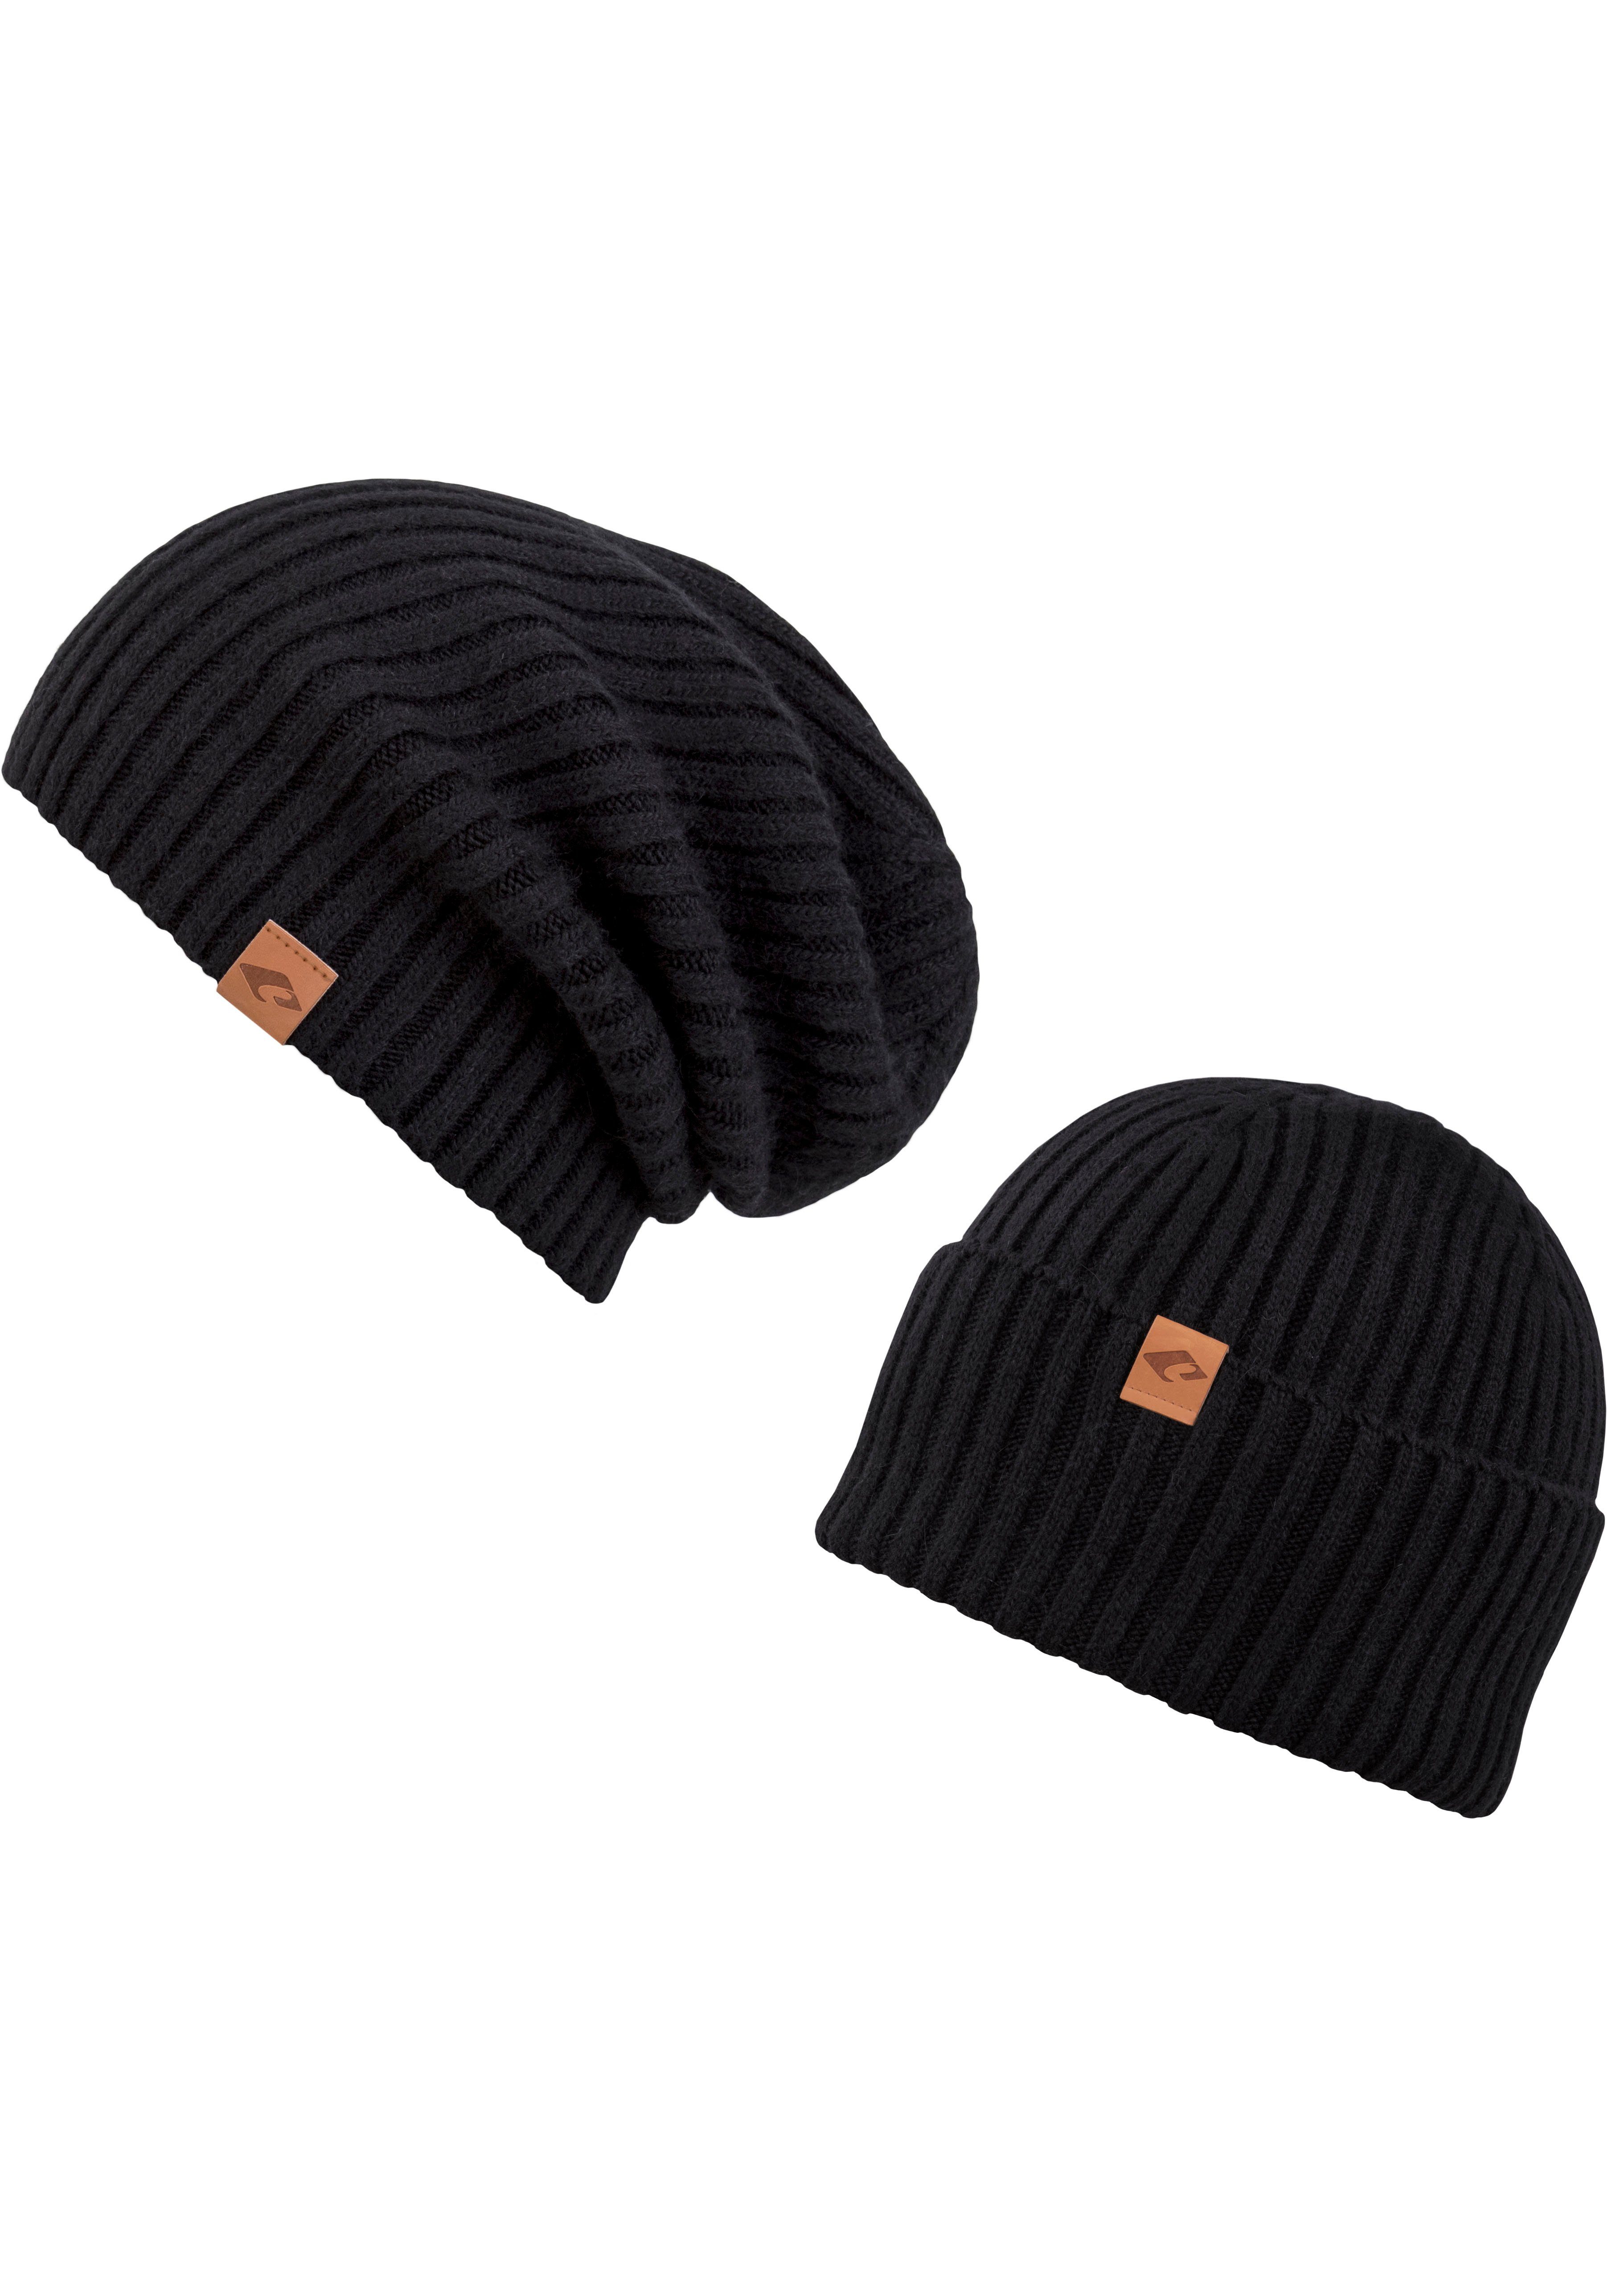 Beanie Justin chillouts black Hat